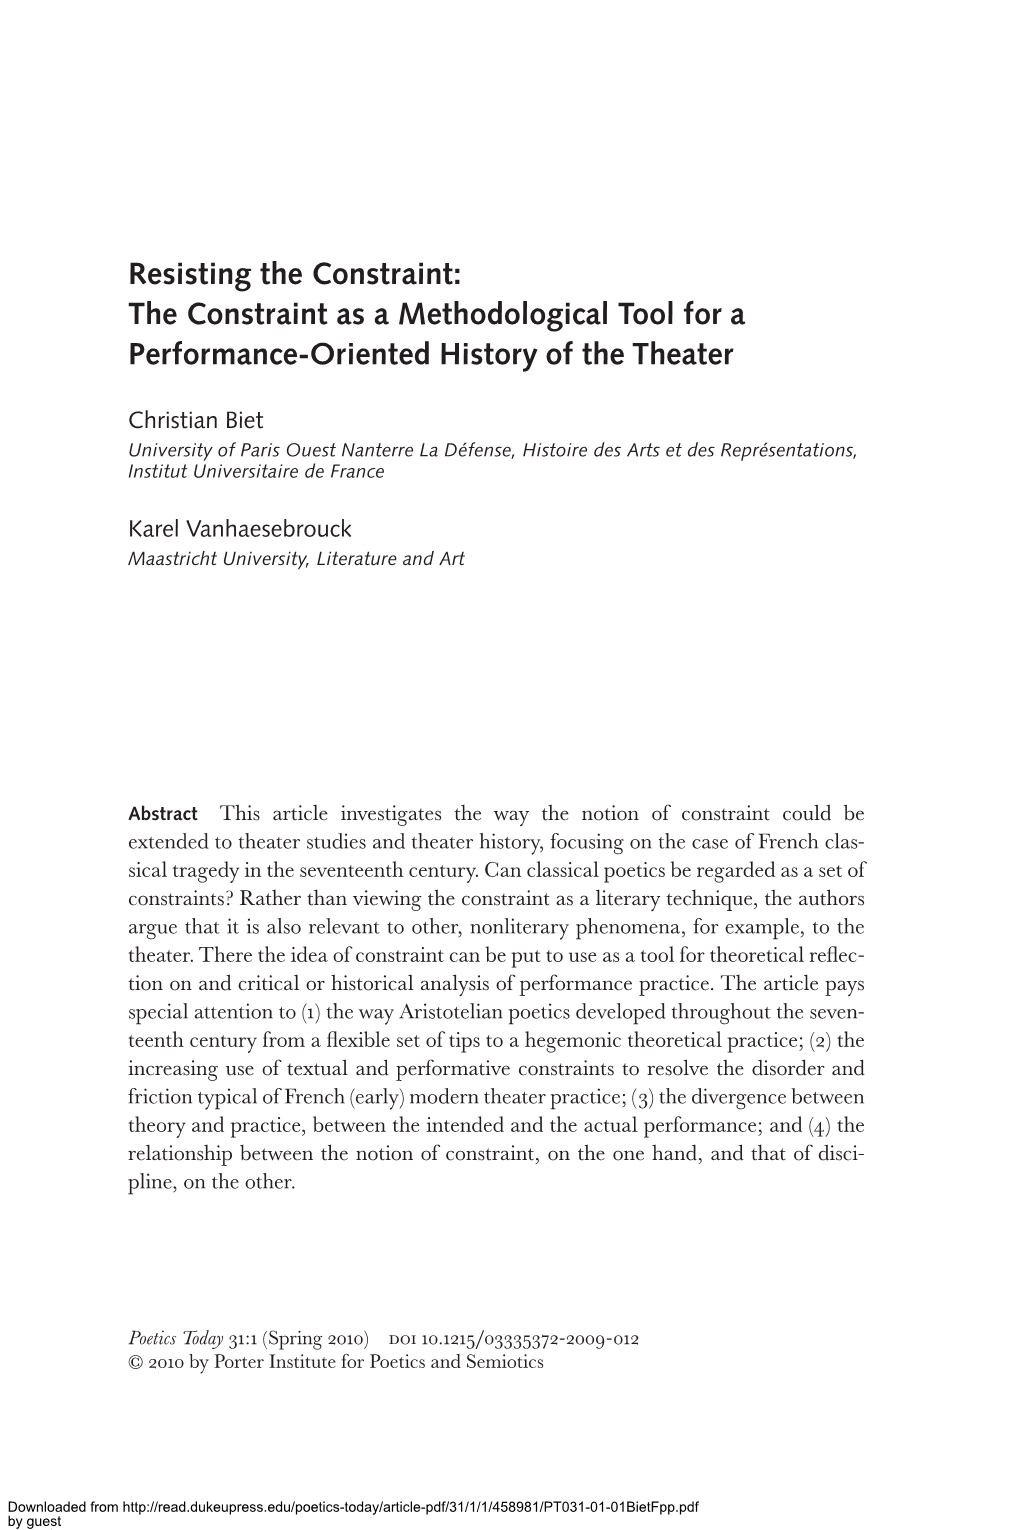 The Constraint As a Methodological Tool for a Performance-Oriented History of the Theater